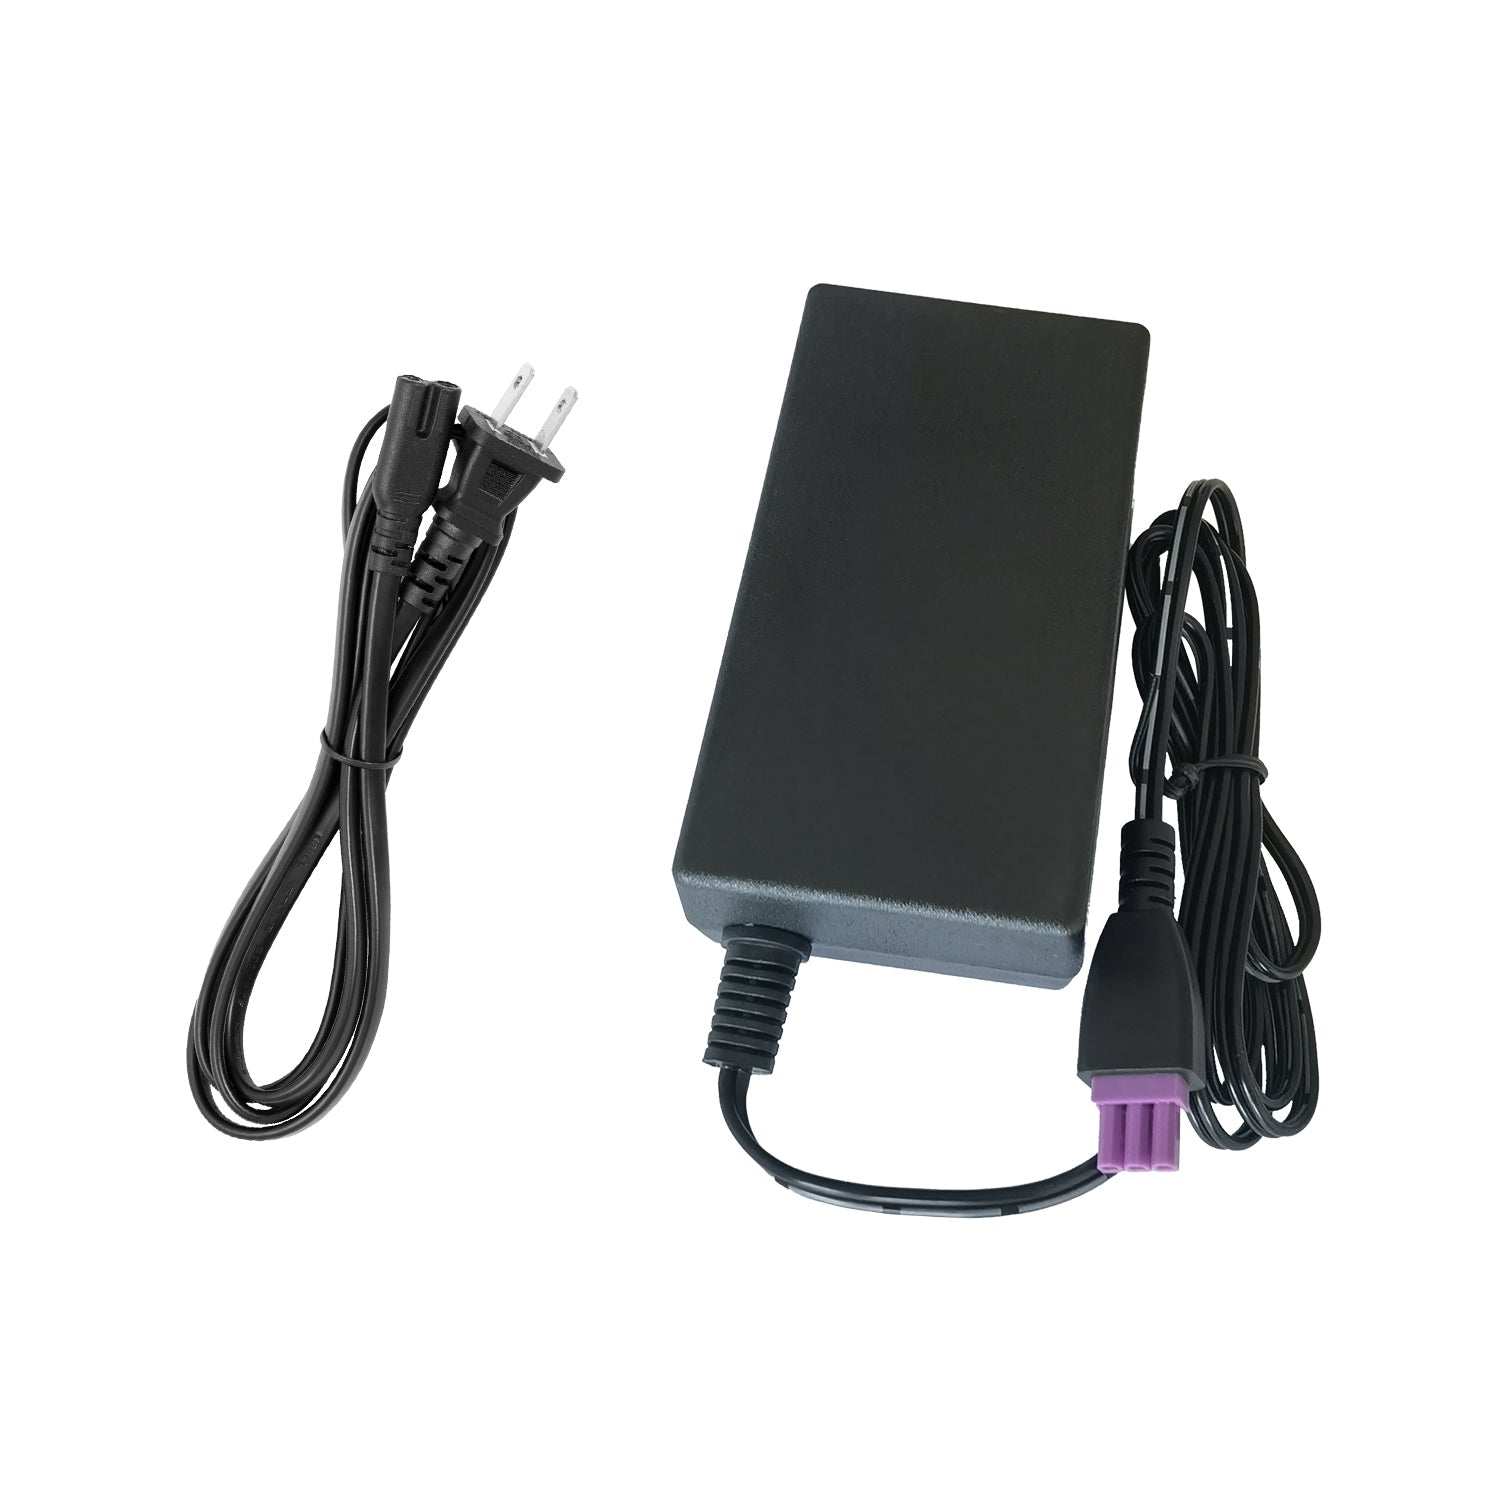 Power Adapter for HP 0957-2271 Printer.